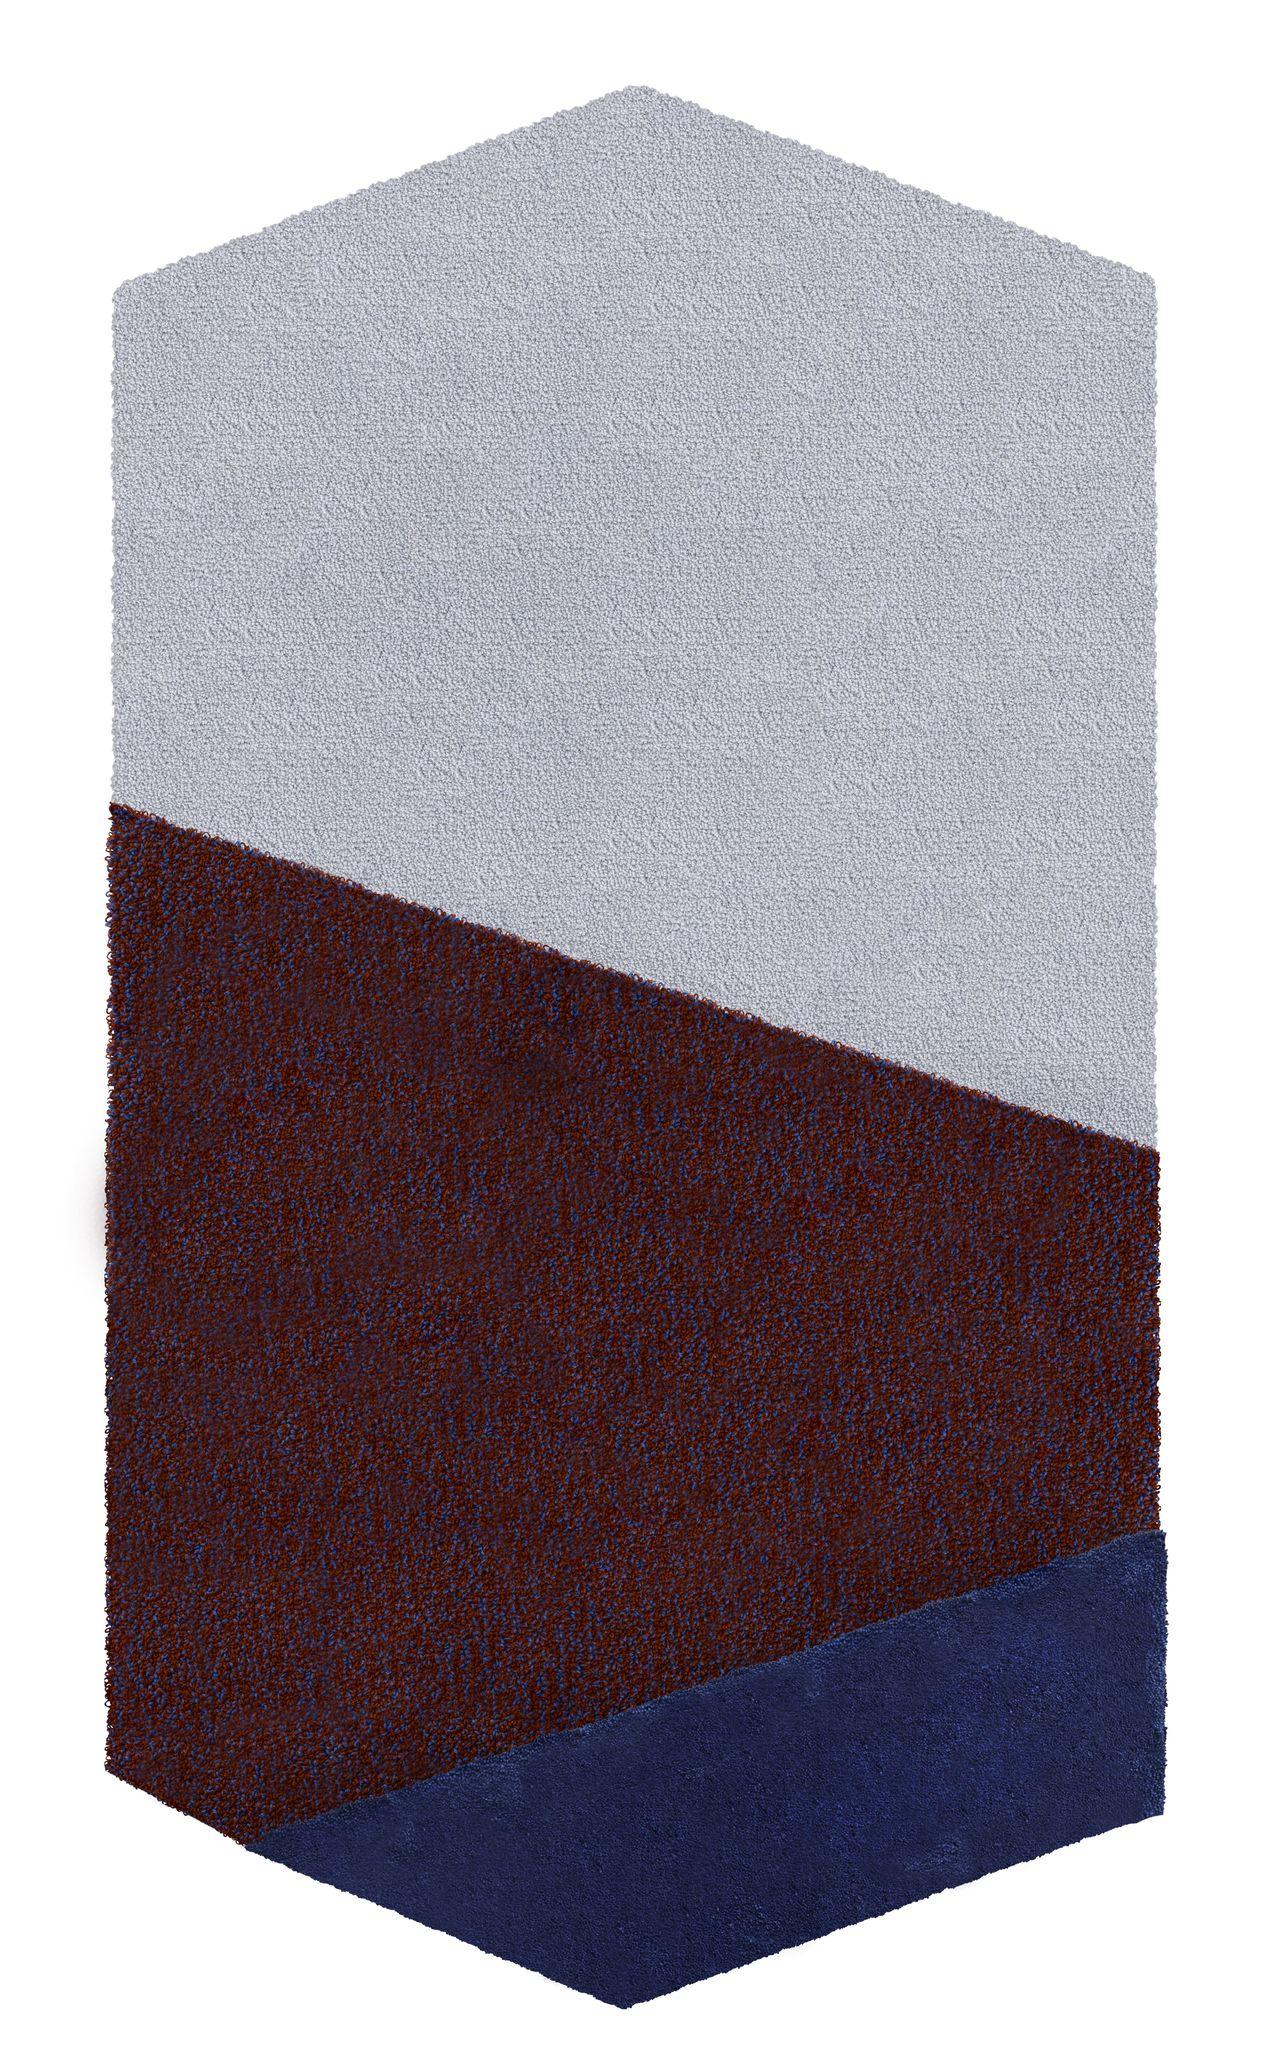 Italian Oci Triptych S, Composition of 3 Rugs 100% Wool /Blue and Brick by Portego For Sale